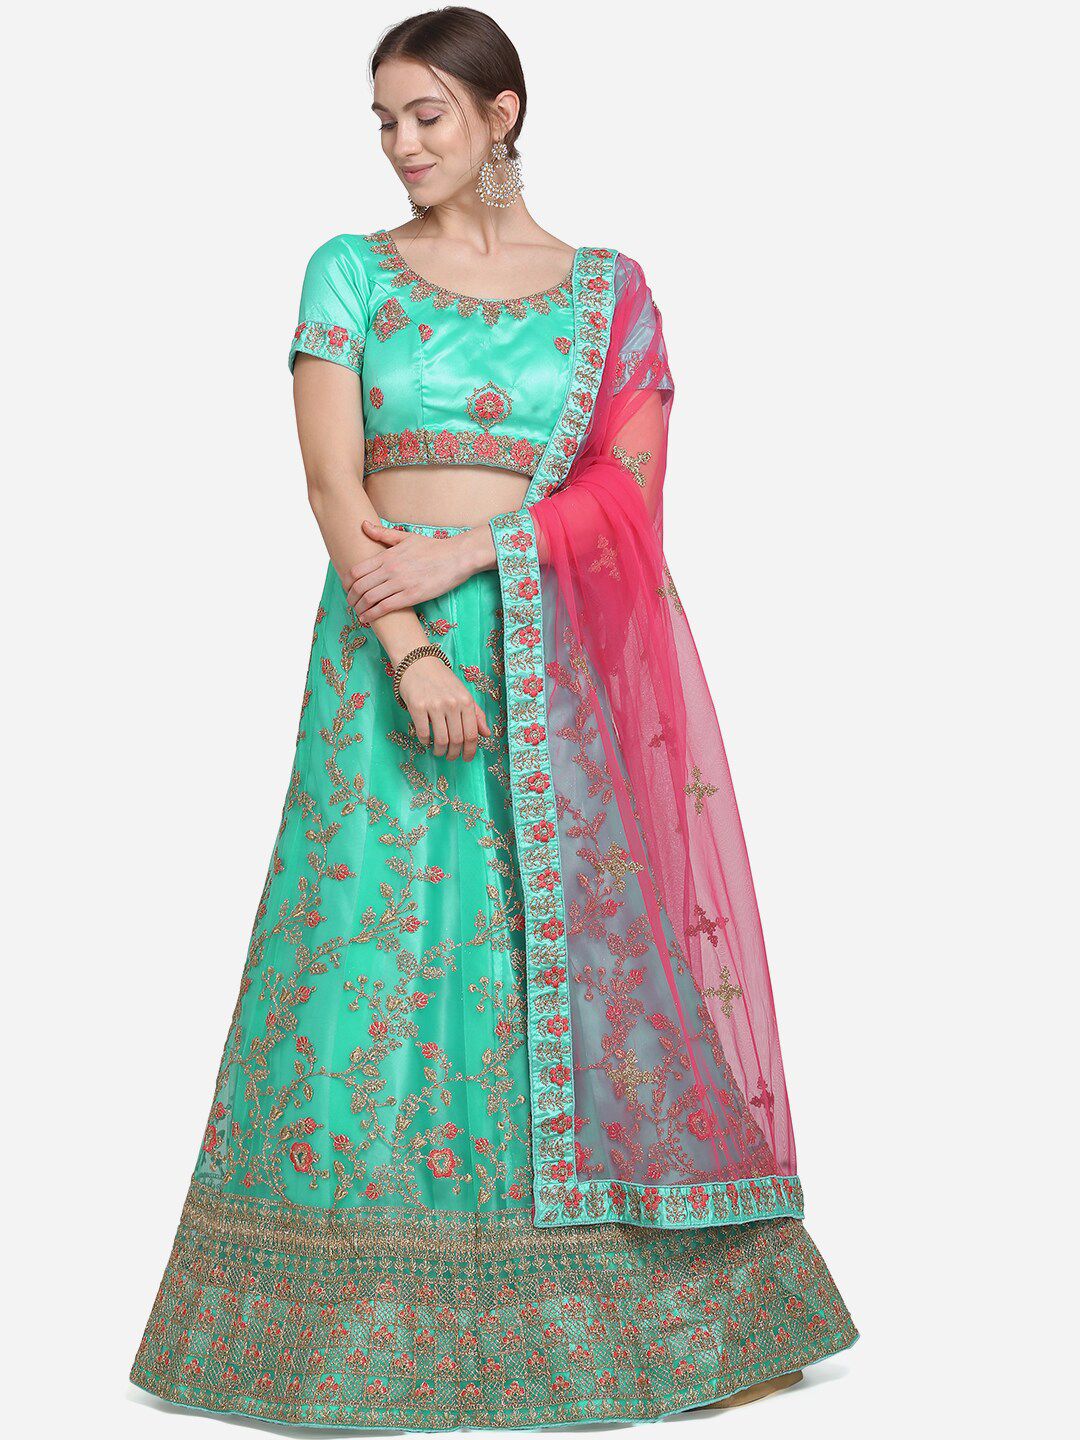 VRSALES Sea Green & Pink Embroidered Semi-Stitched Lehenga & Unstitched Blouse with Dupatta Price in India